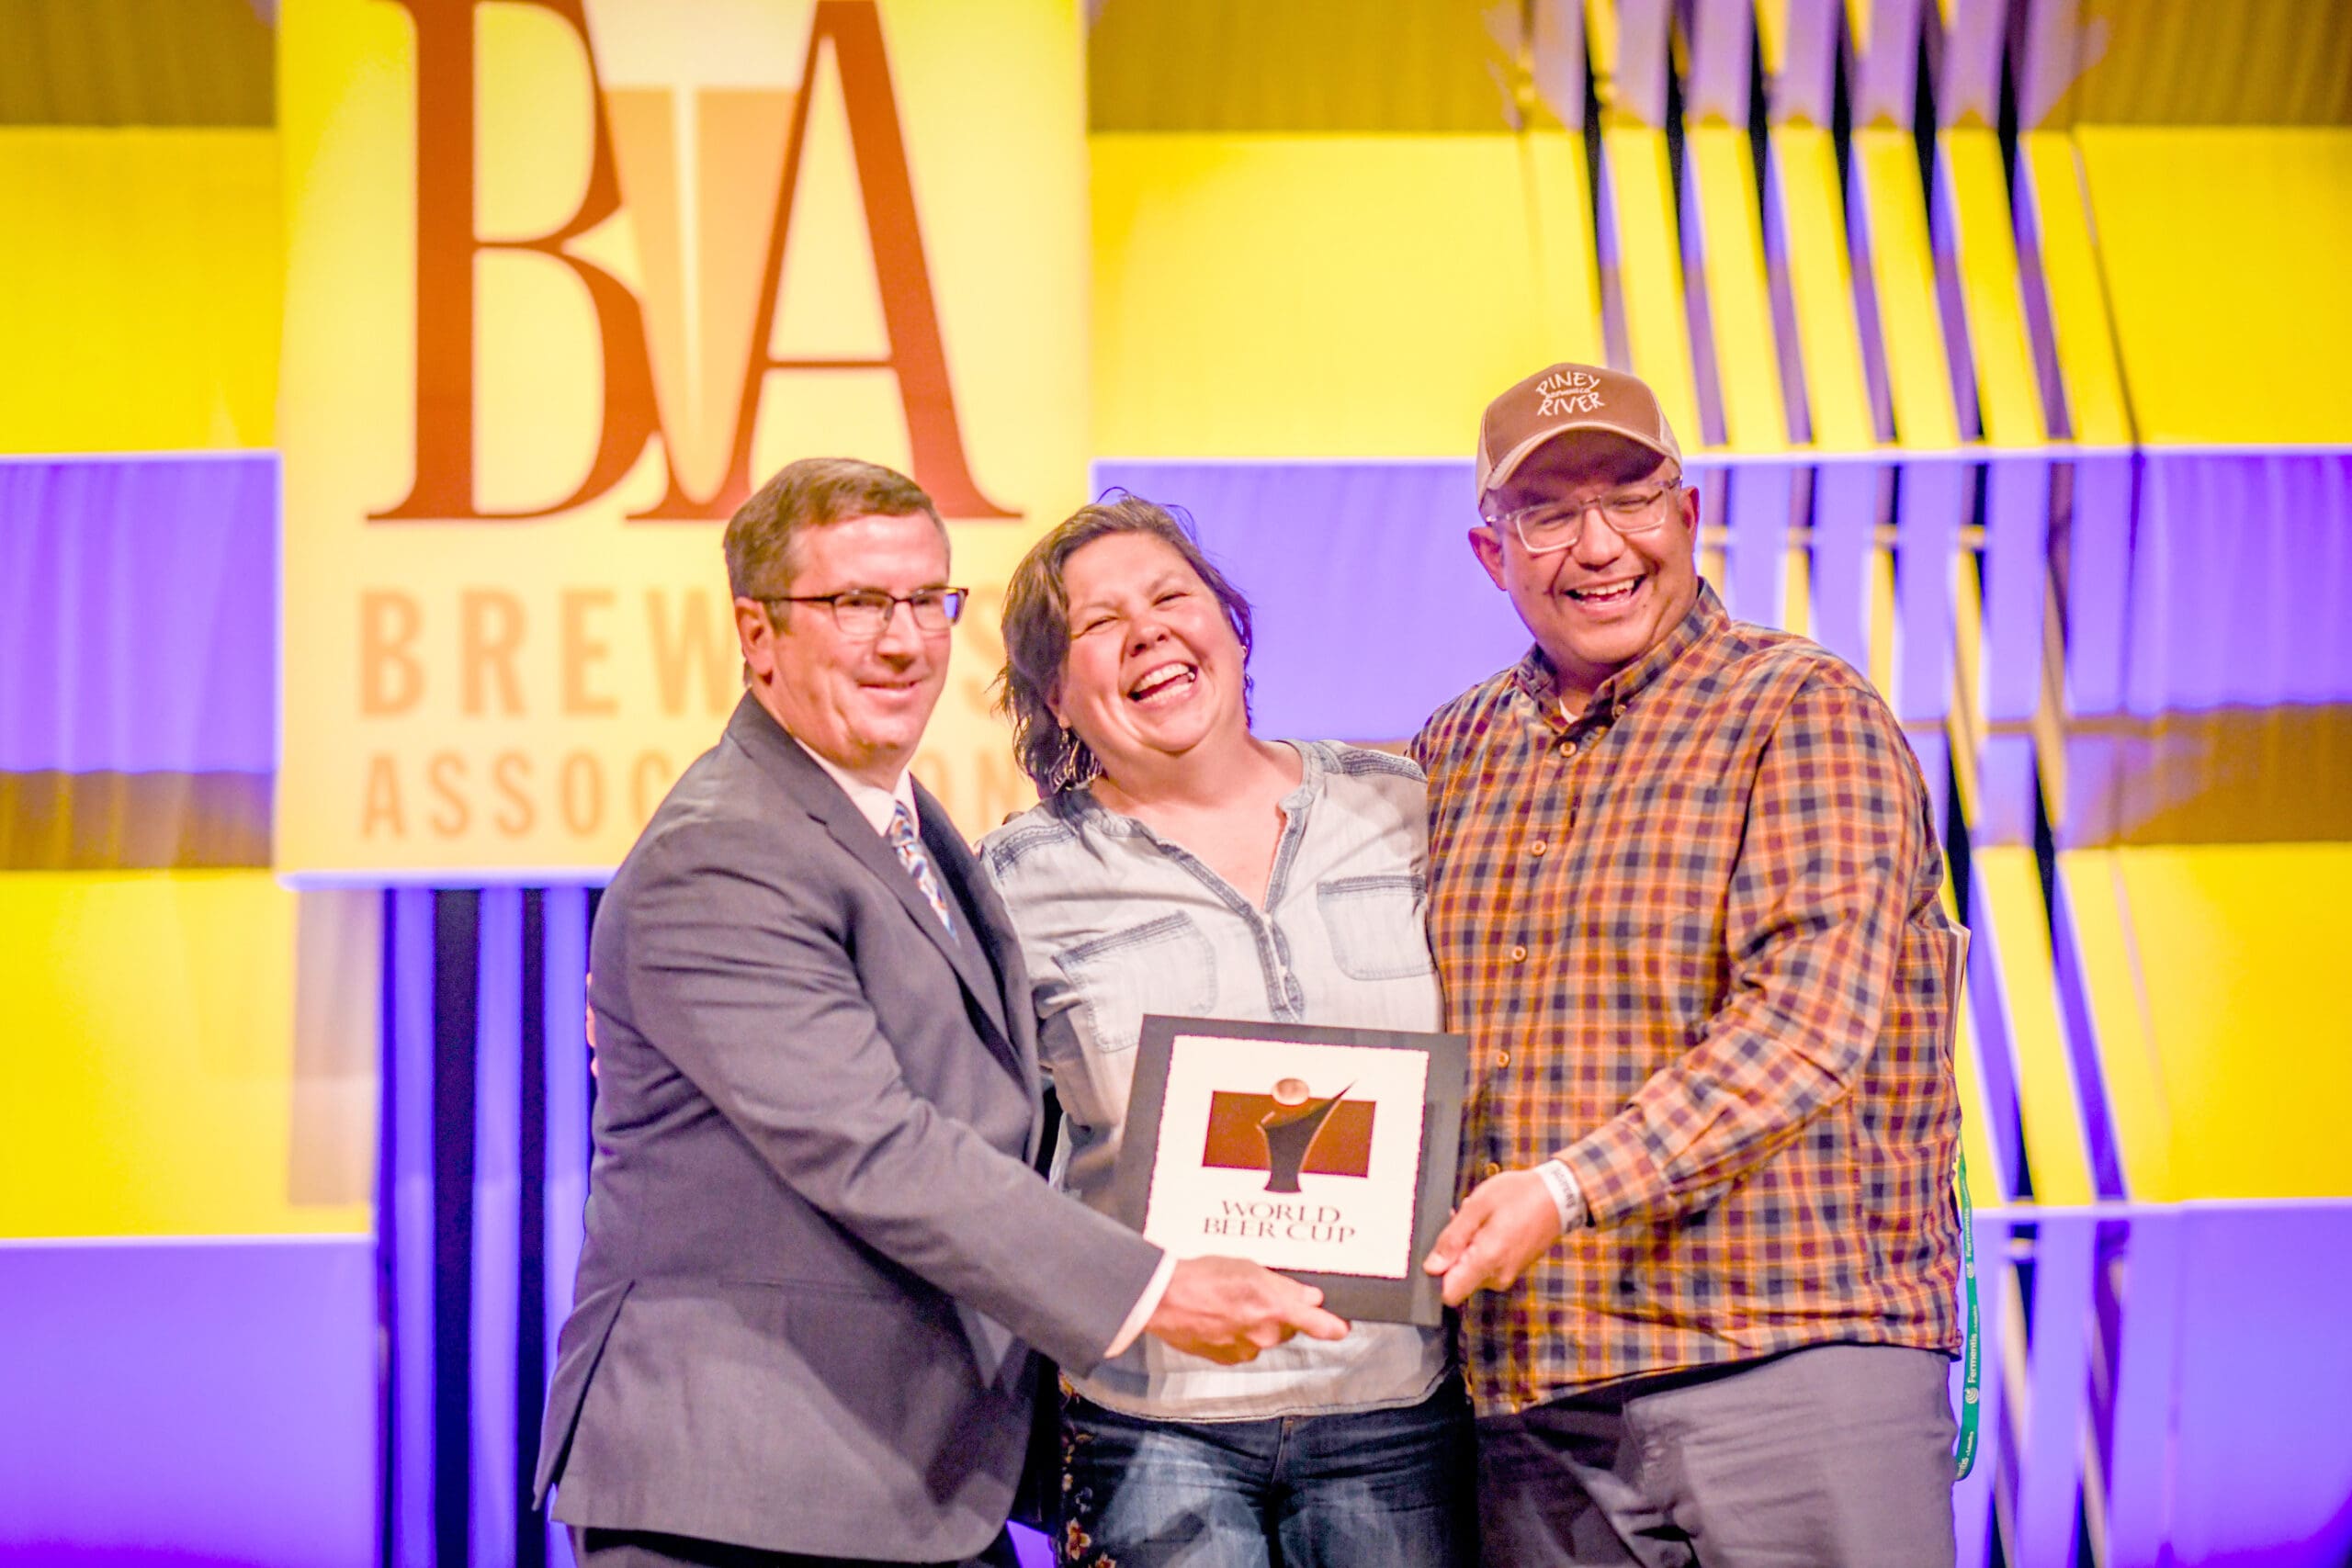 BREWERS ASSOCIATION EXPORT MEMBERS WIN AT WORLD BEER CUP The British